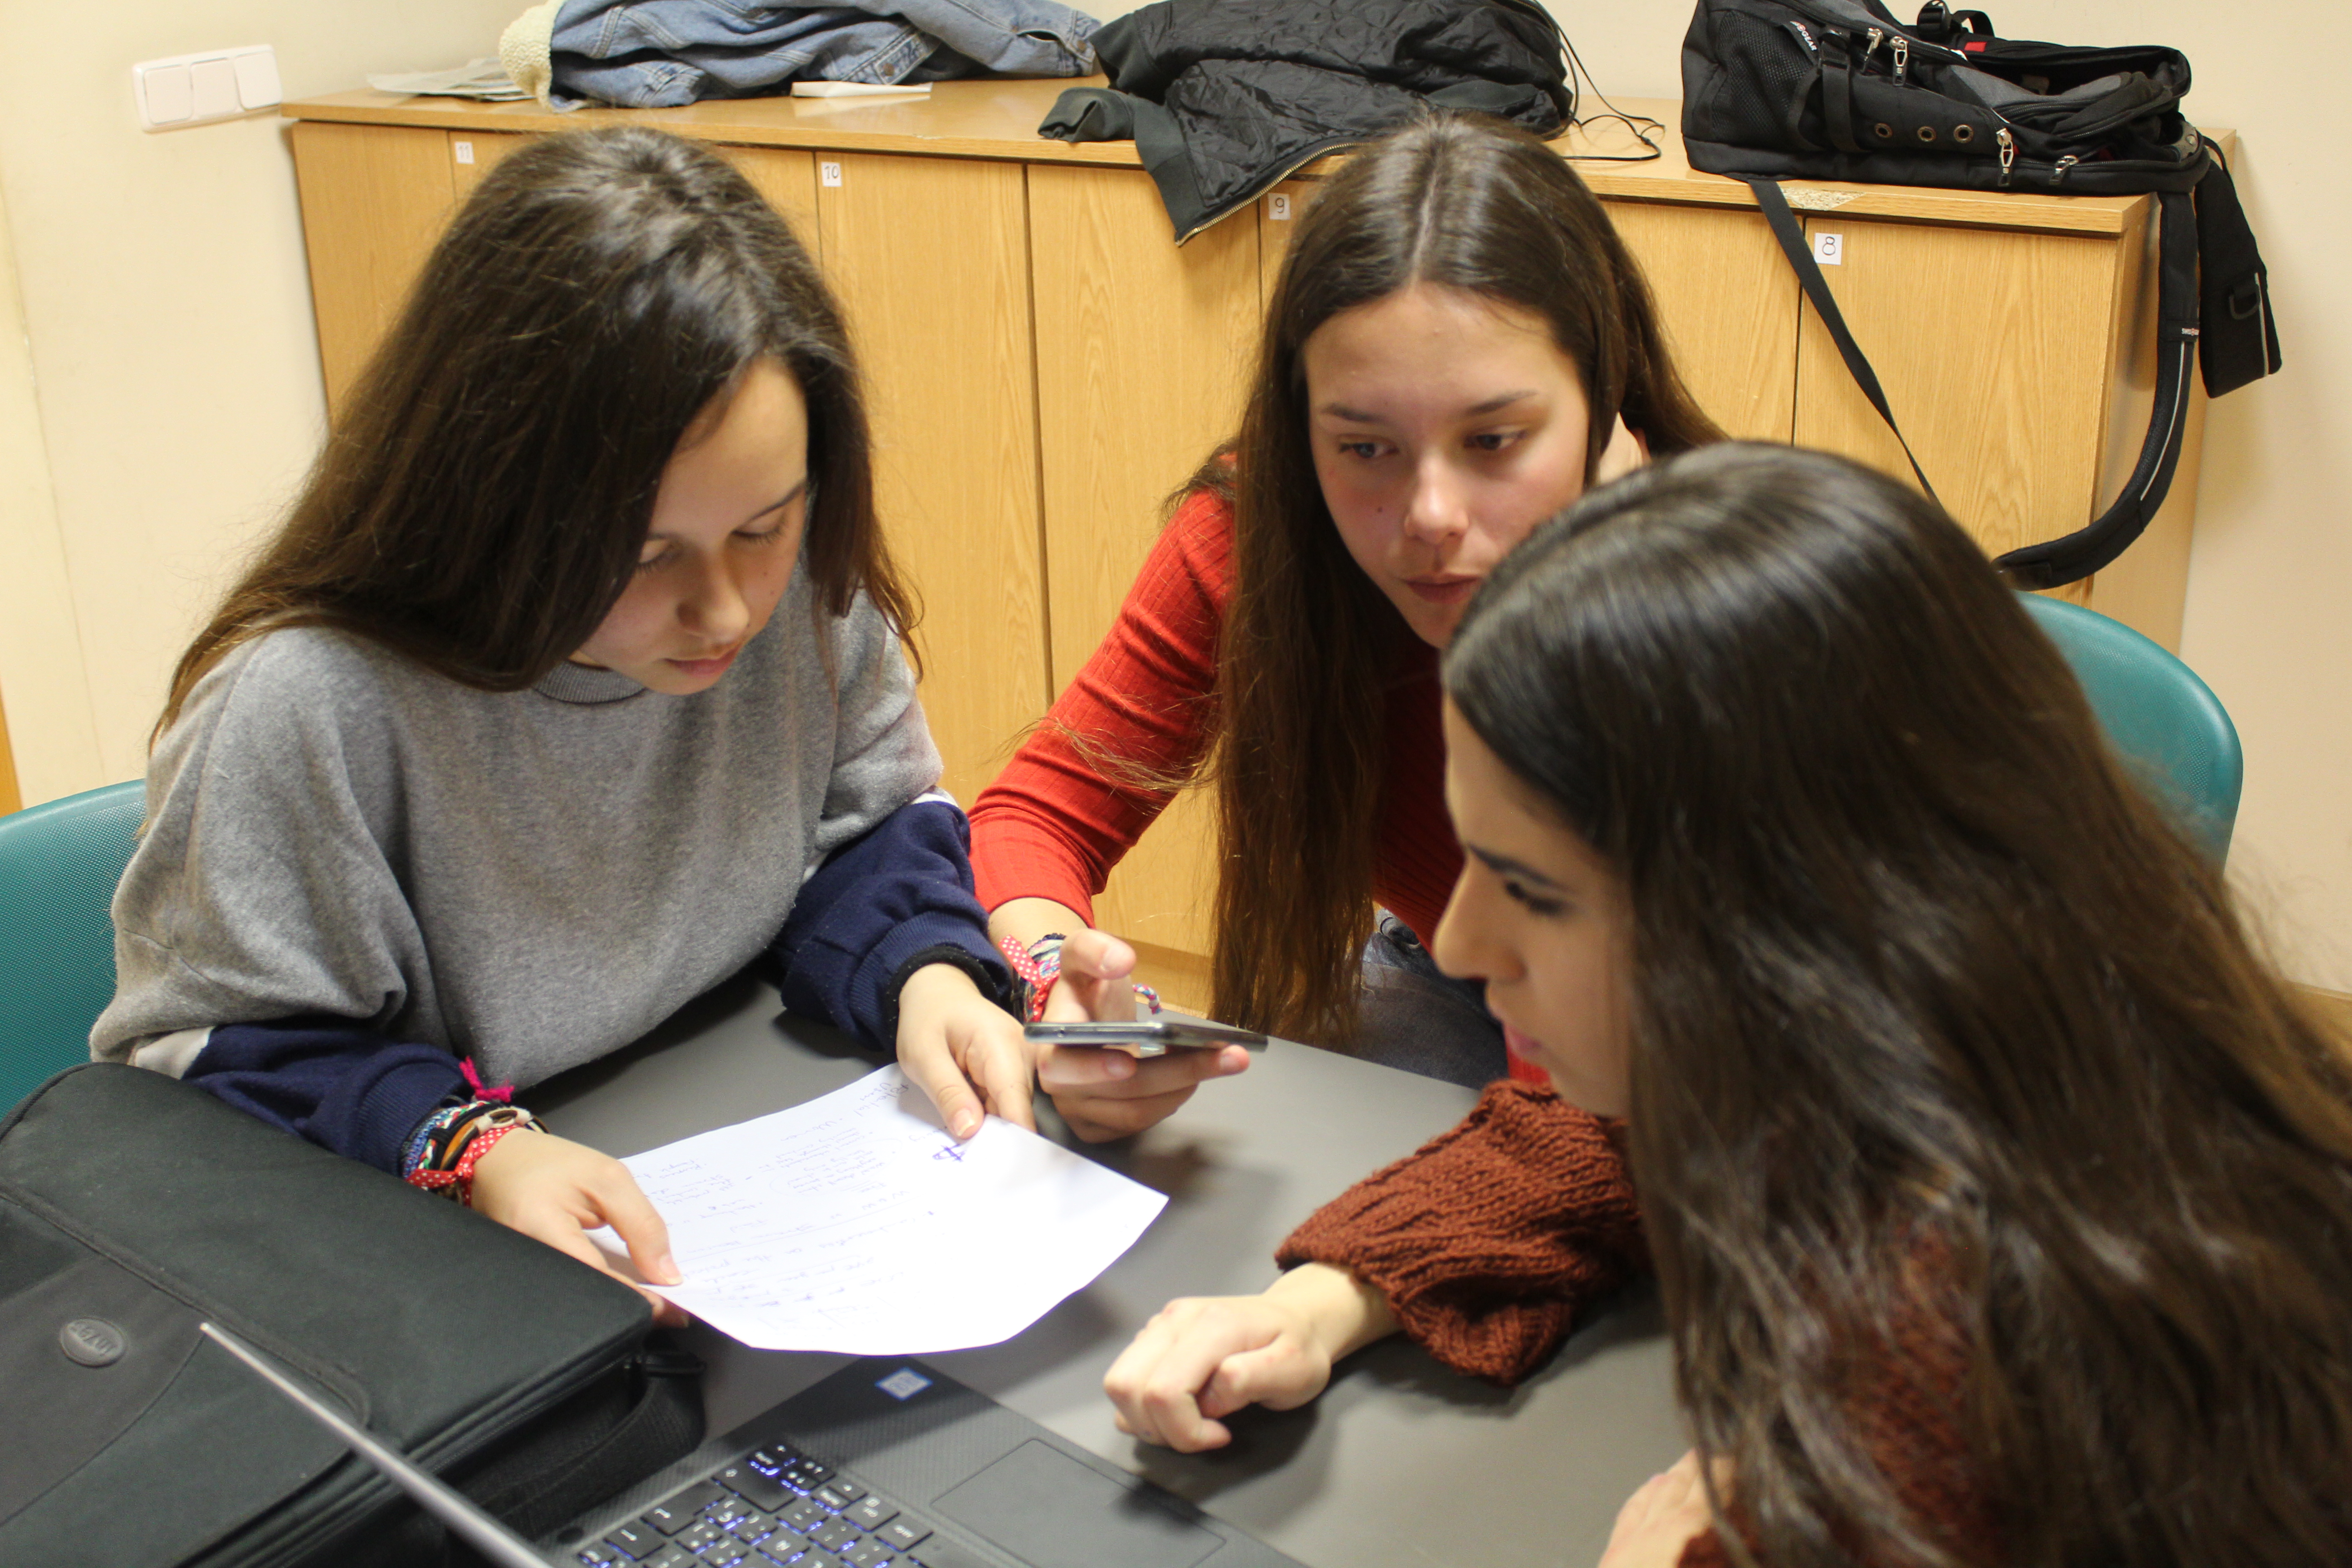 Paula, Lucía A., Sandra, Nuria, and Lucía F. – Secondary school students, and the brains behind “When & Where,” a mobile app that makes streets safer for women.